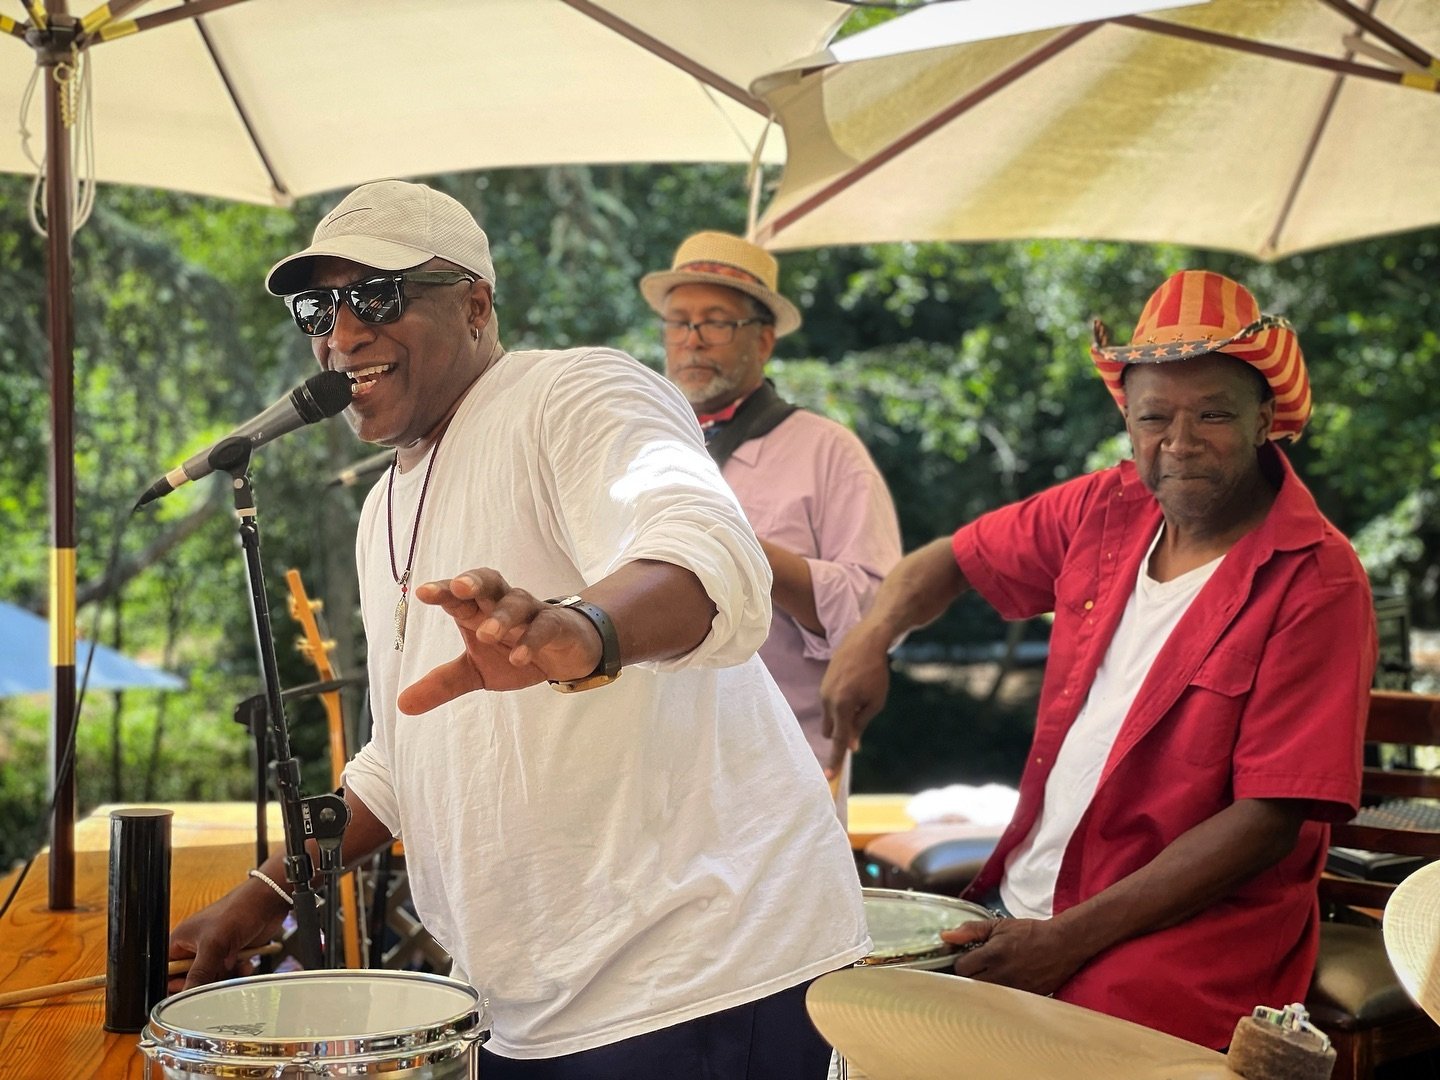 This weekend kicks off our 2024 music season! We can&rsquo;t wait to see all of you enjoying the weekend down by the river.

SAT - afternoon tunes with Rick Chelew
SUN - James Henry and Hands on Fire Band

Music season means it&rsquo;s also pool and 